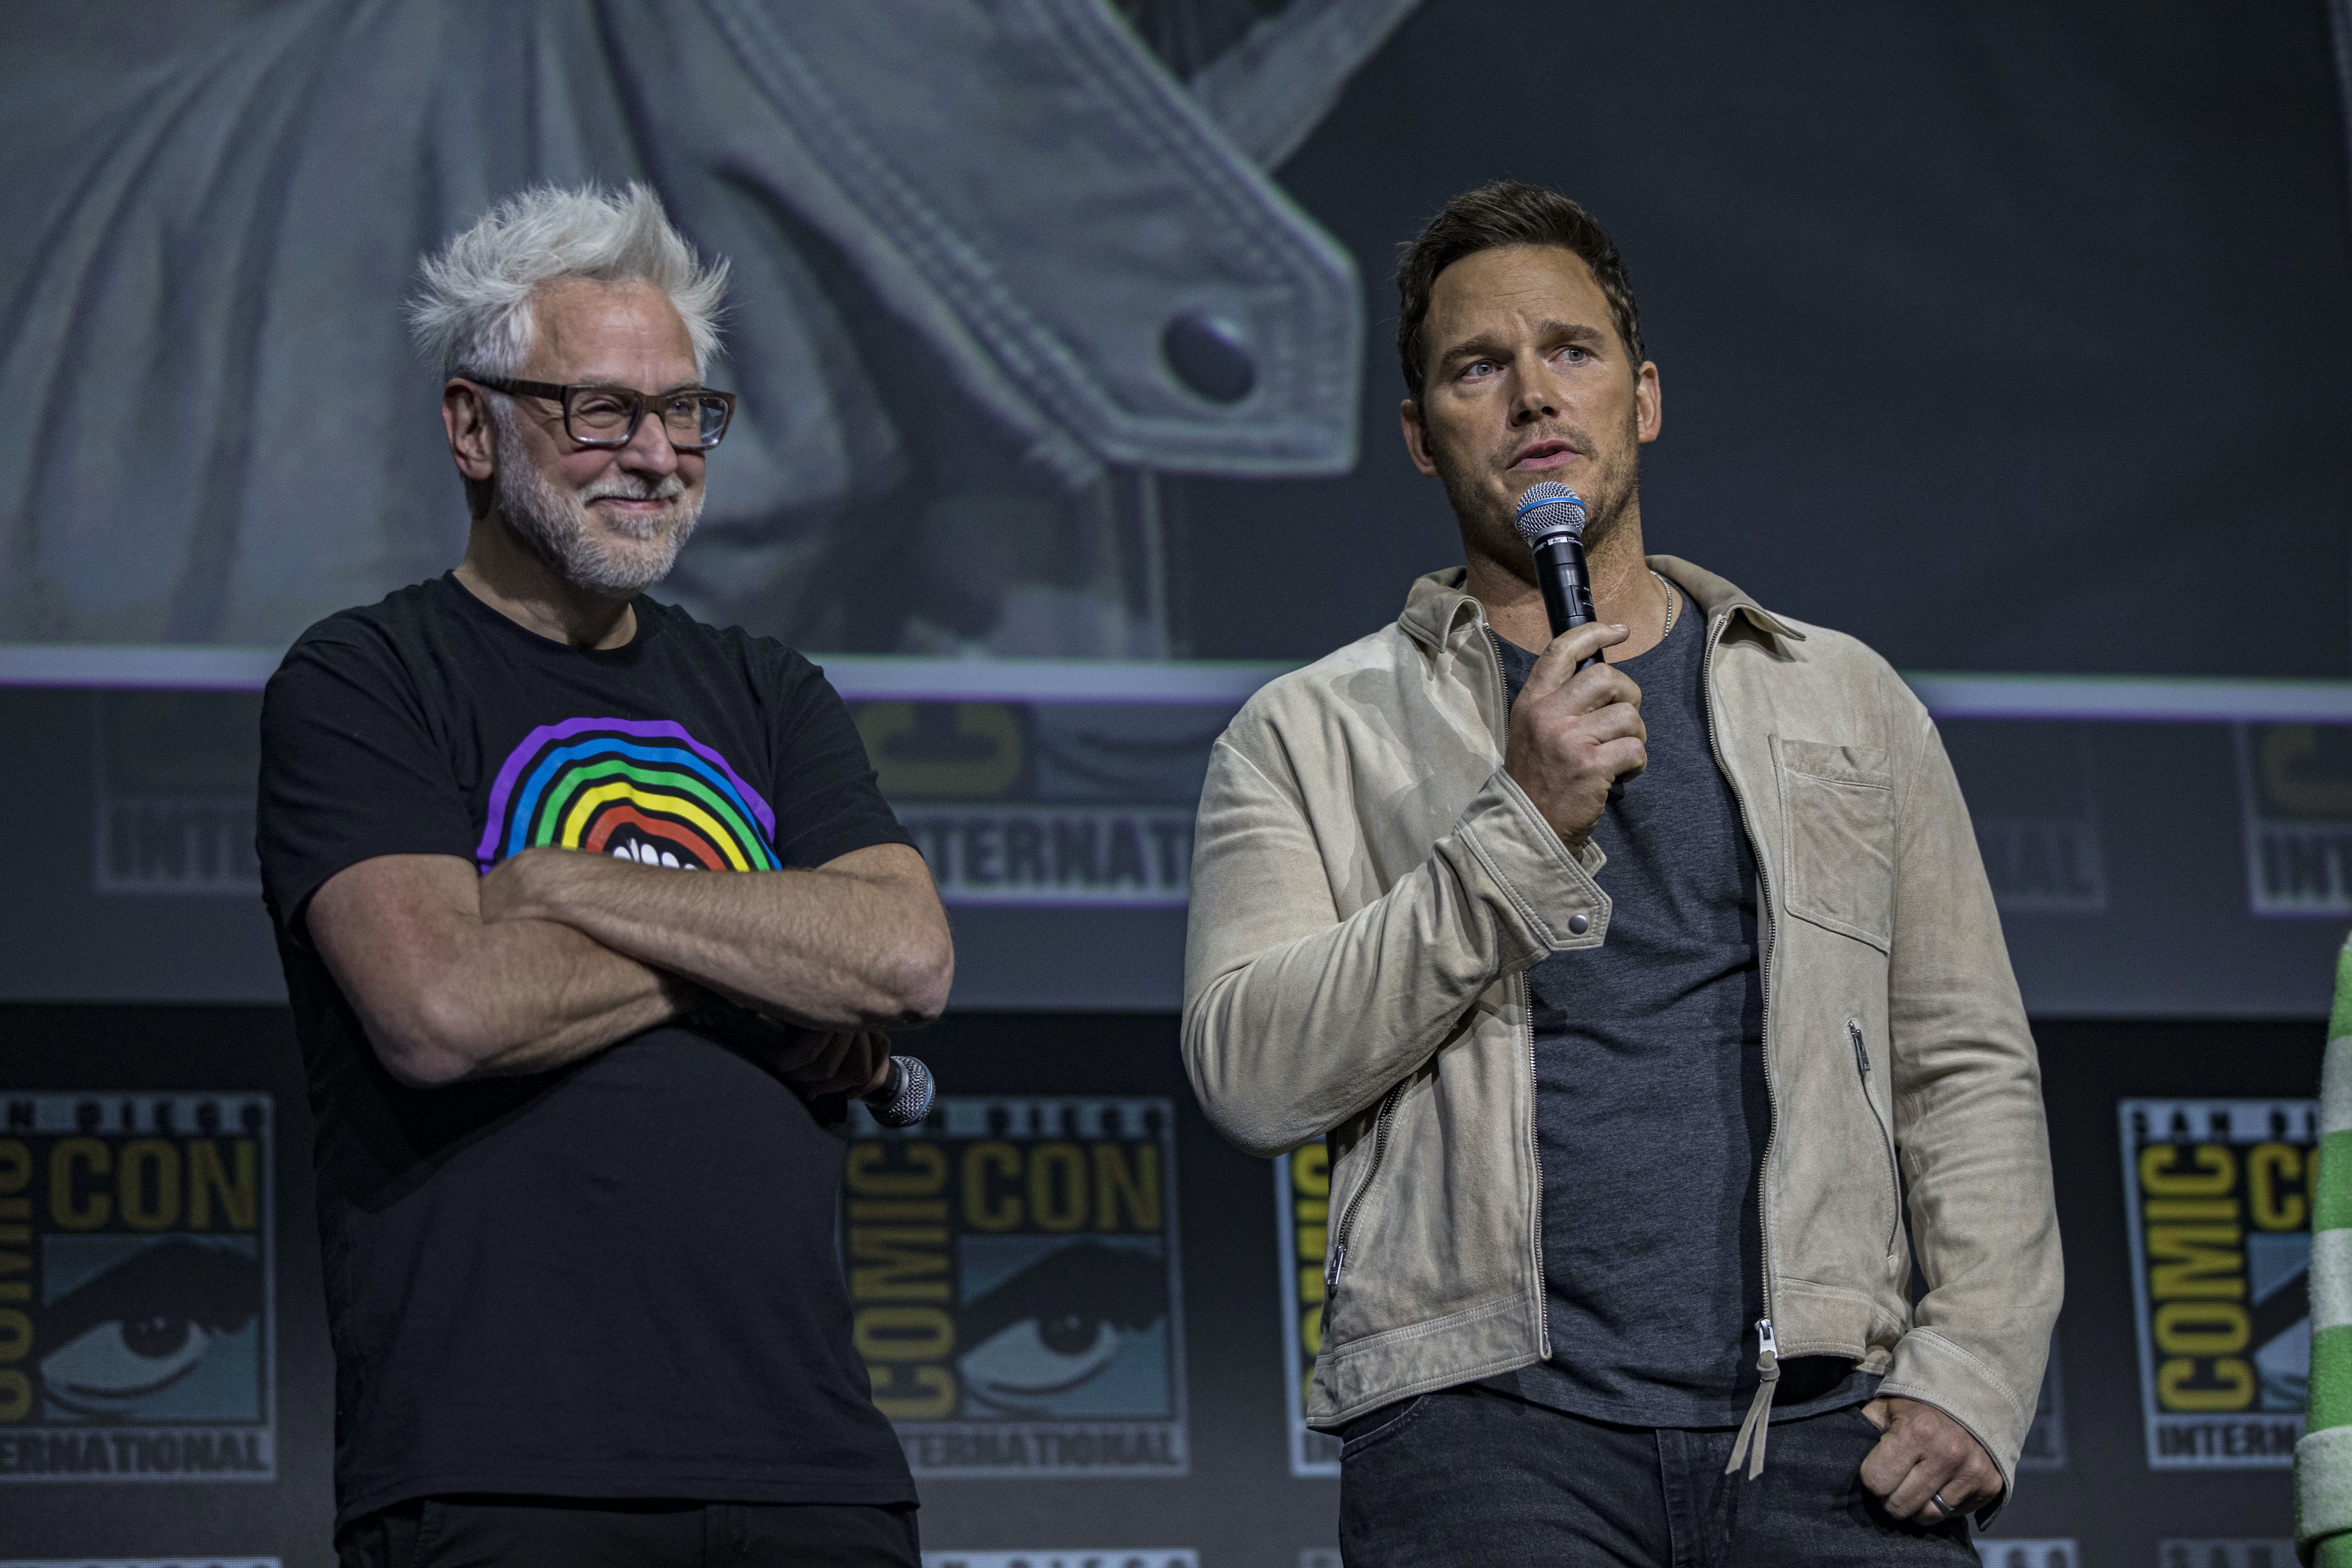 James Gunn and Chris Pratt speak onstage about Guardians of the Galaxy Vol. 3 at the Marvel Cinematic Universe panel during 2022 San Diego Comic Con